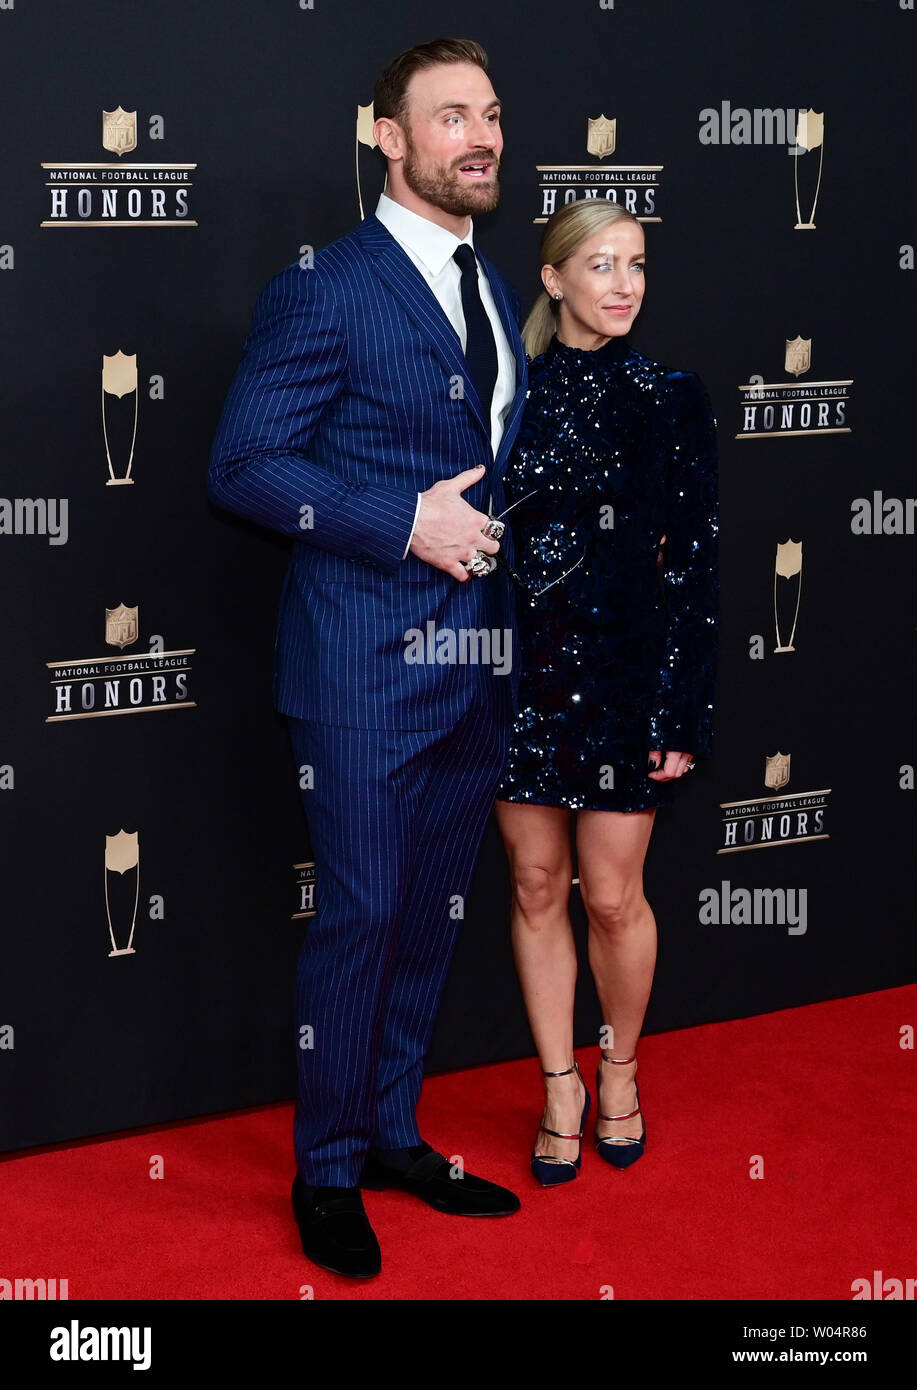 2018 NFL Man of the Year finalist Chris Long of the Philadelphia Eagles  arrives on the red carpet at the Fox Theatre for the NFL Honors during Super  Bowl LIII week in